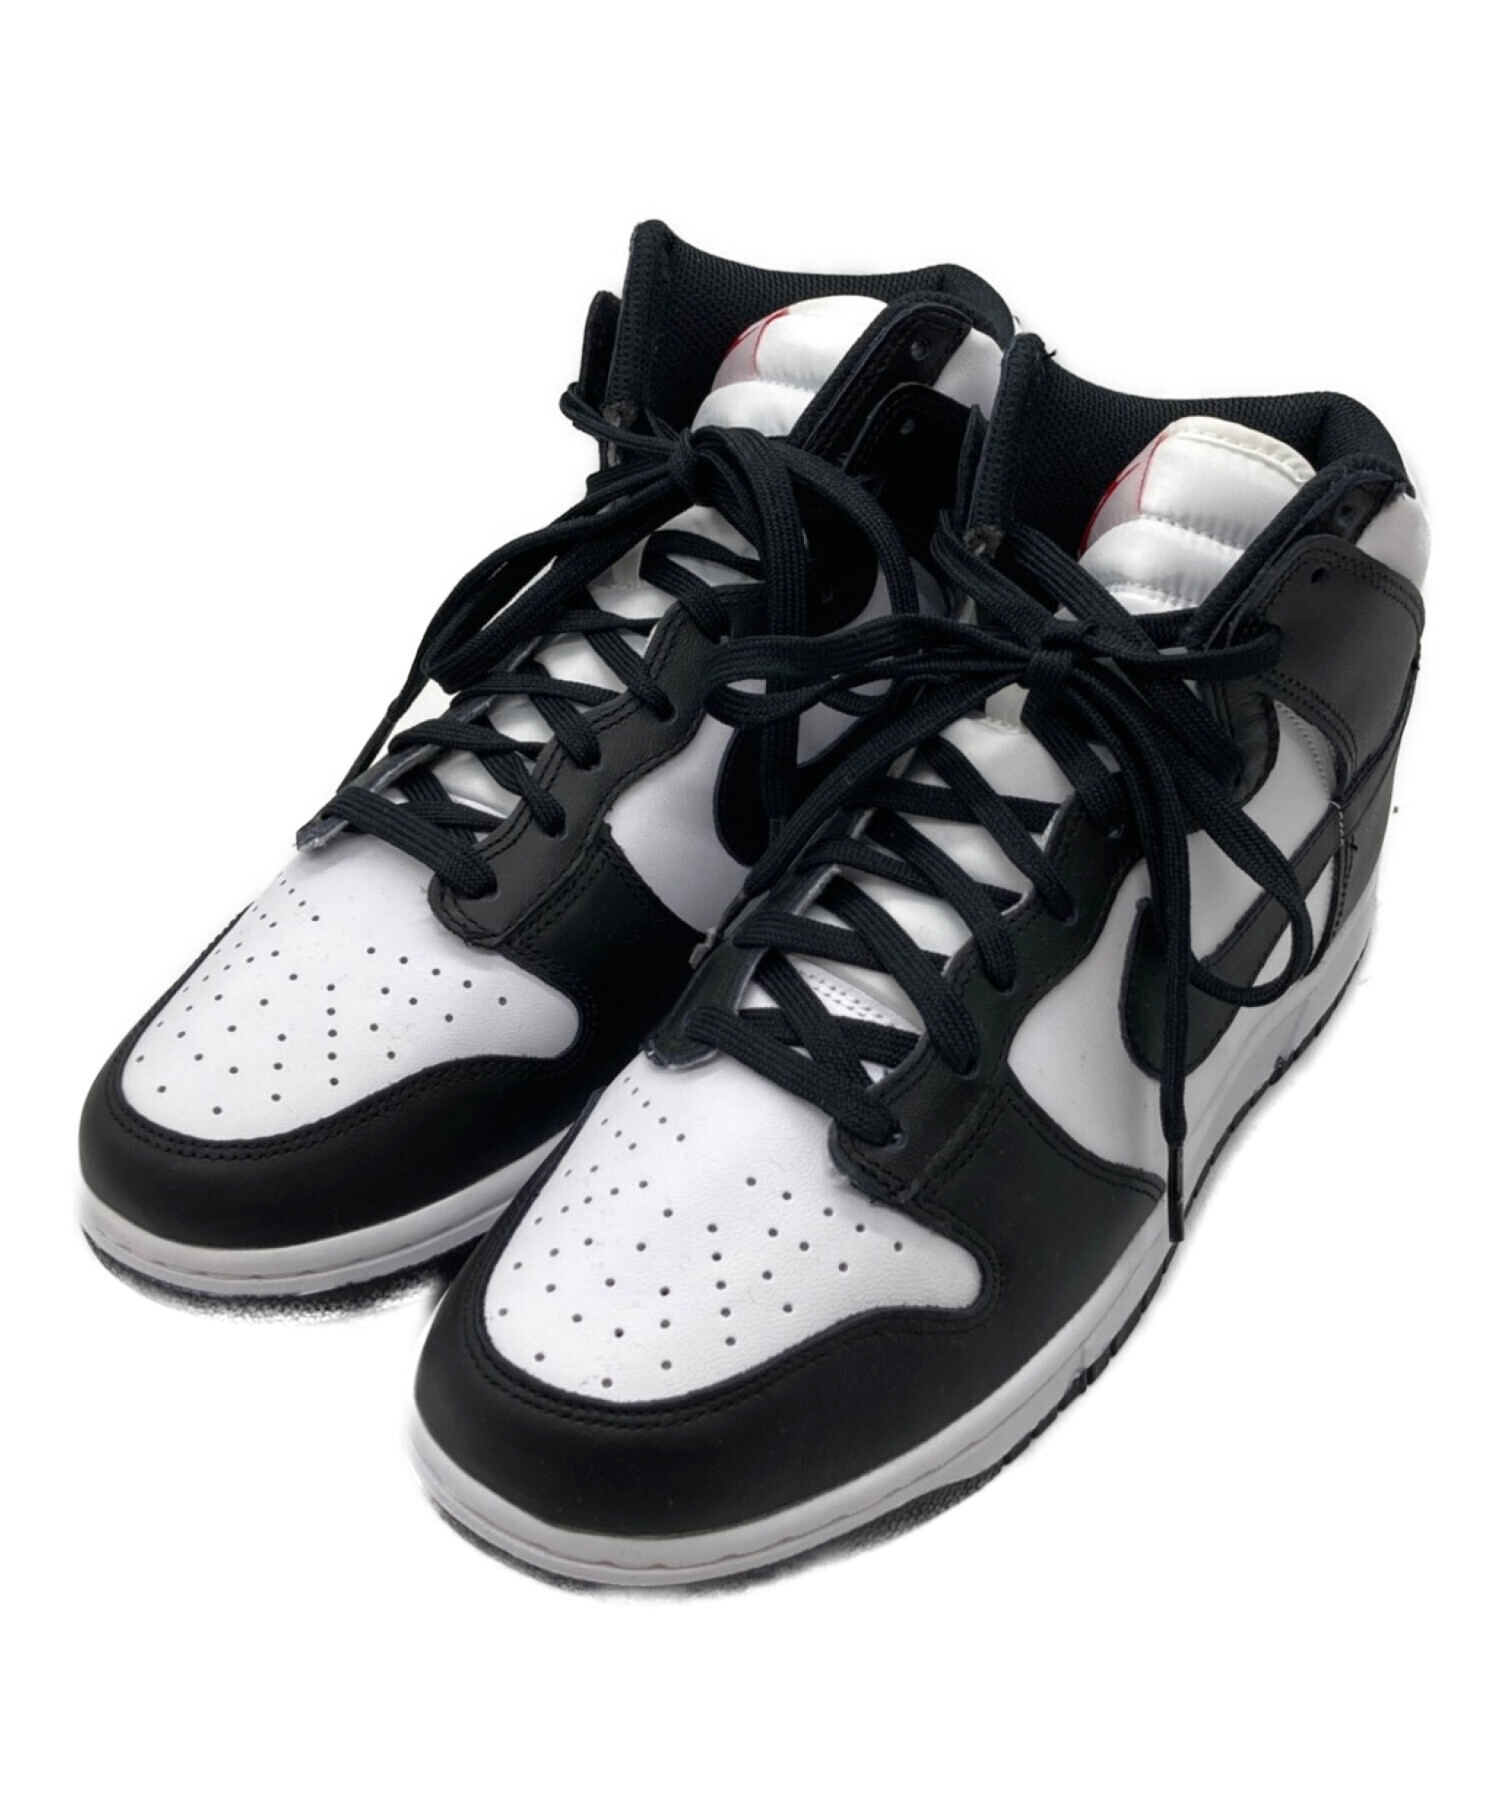 NIKE WMNS DUNK HIGH BLACK AND WHITE25.5㎝